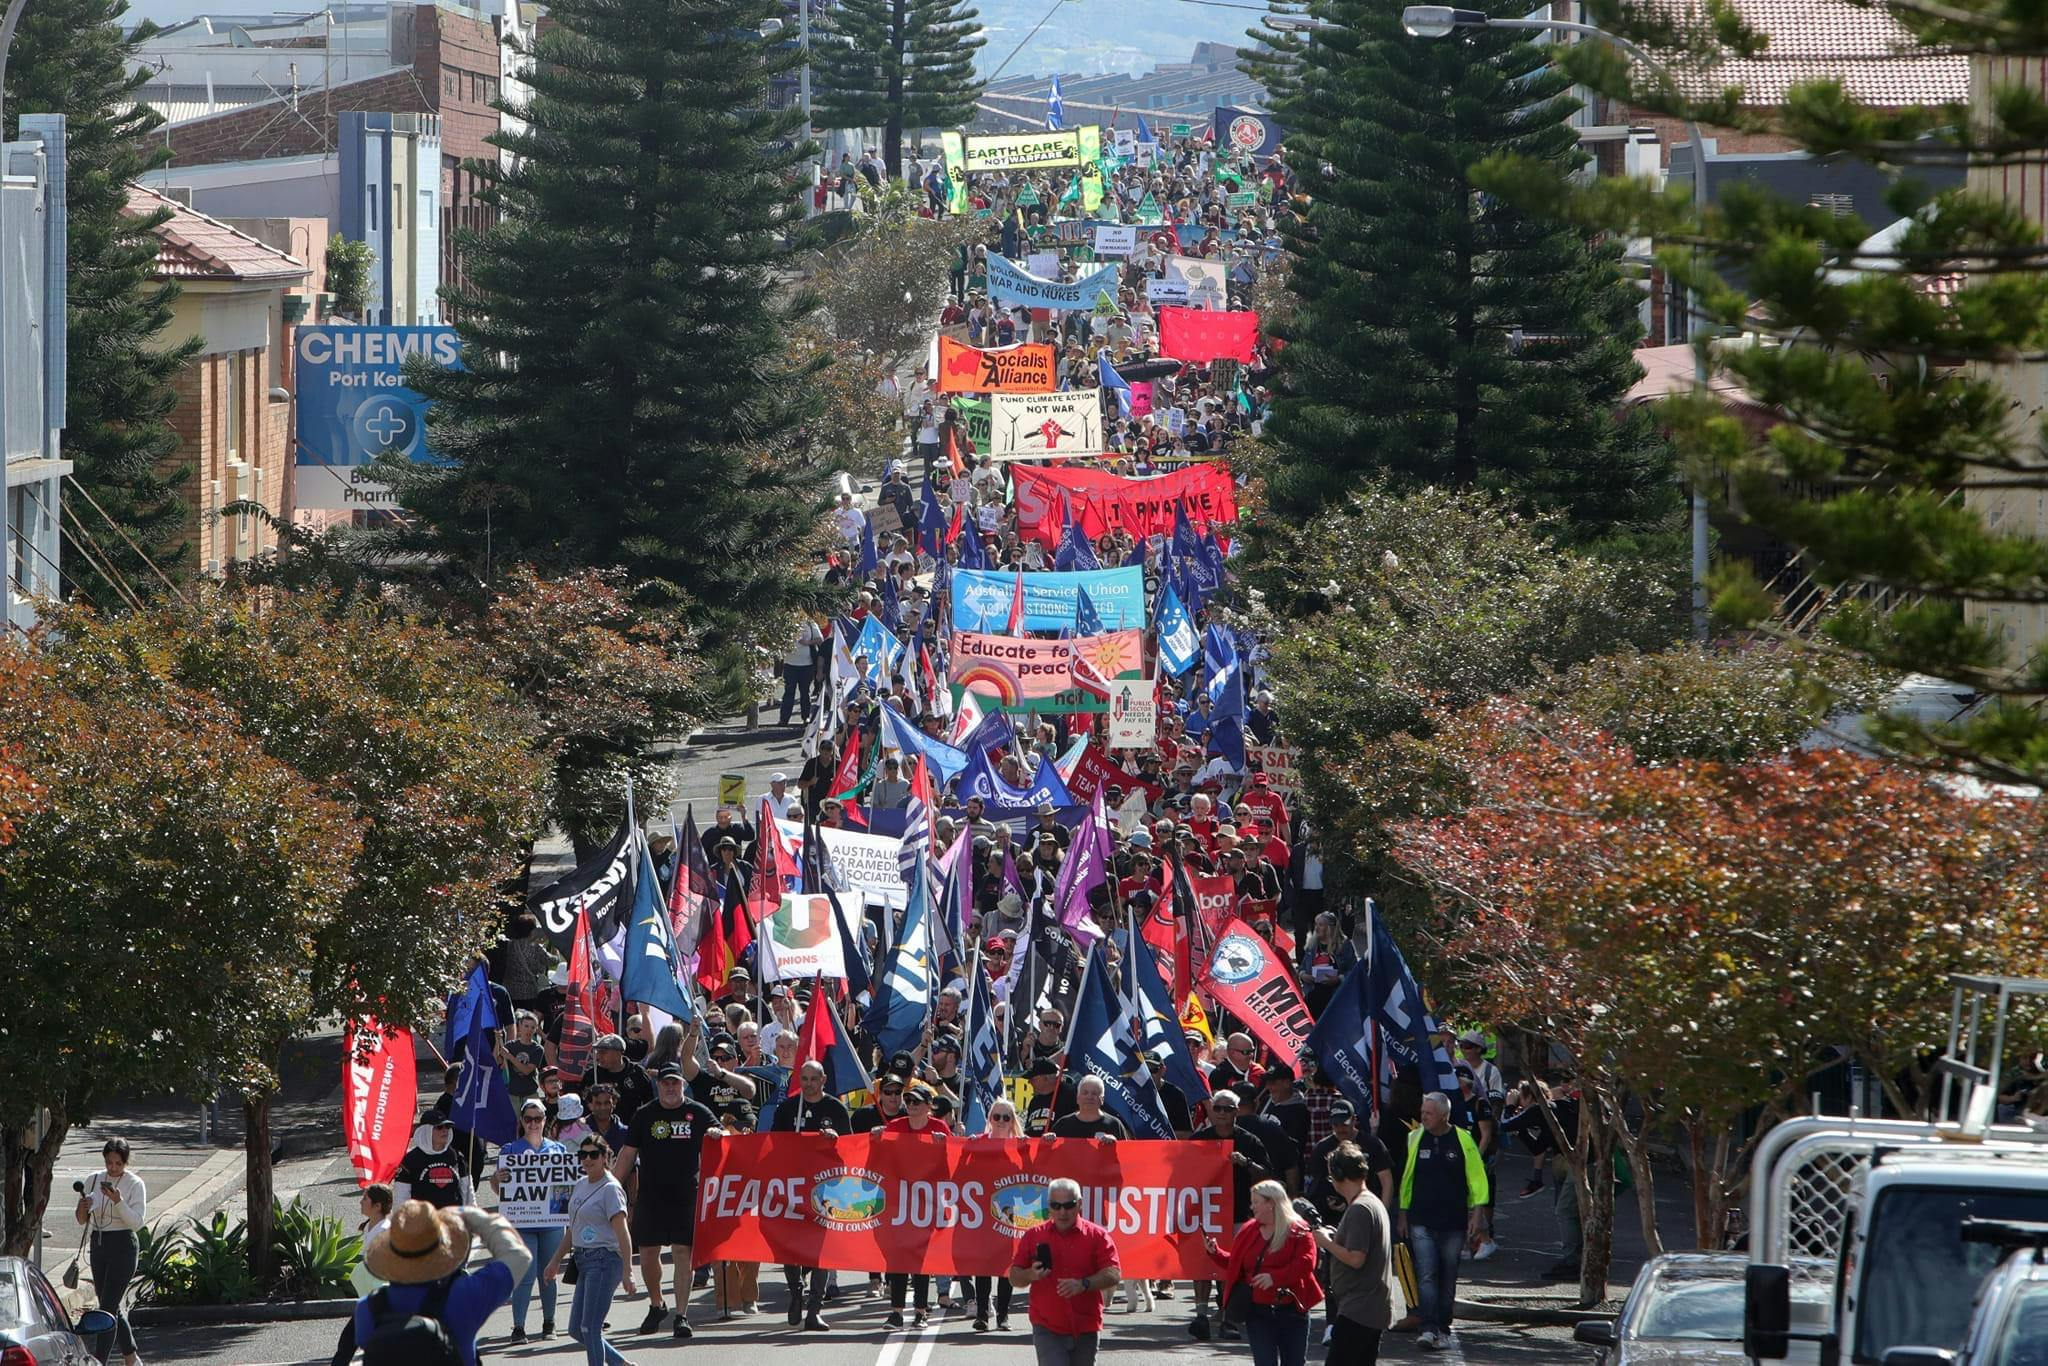 Port Kembla May Day march opposes AUKUS